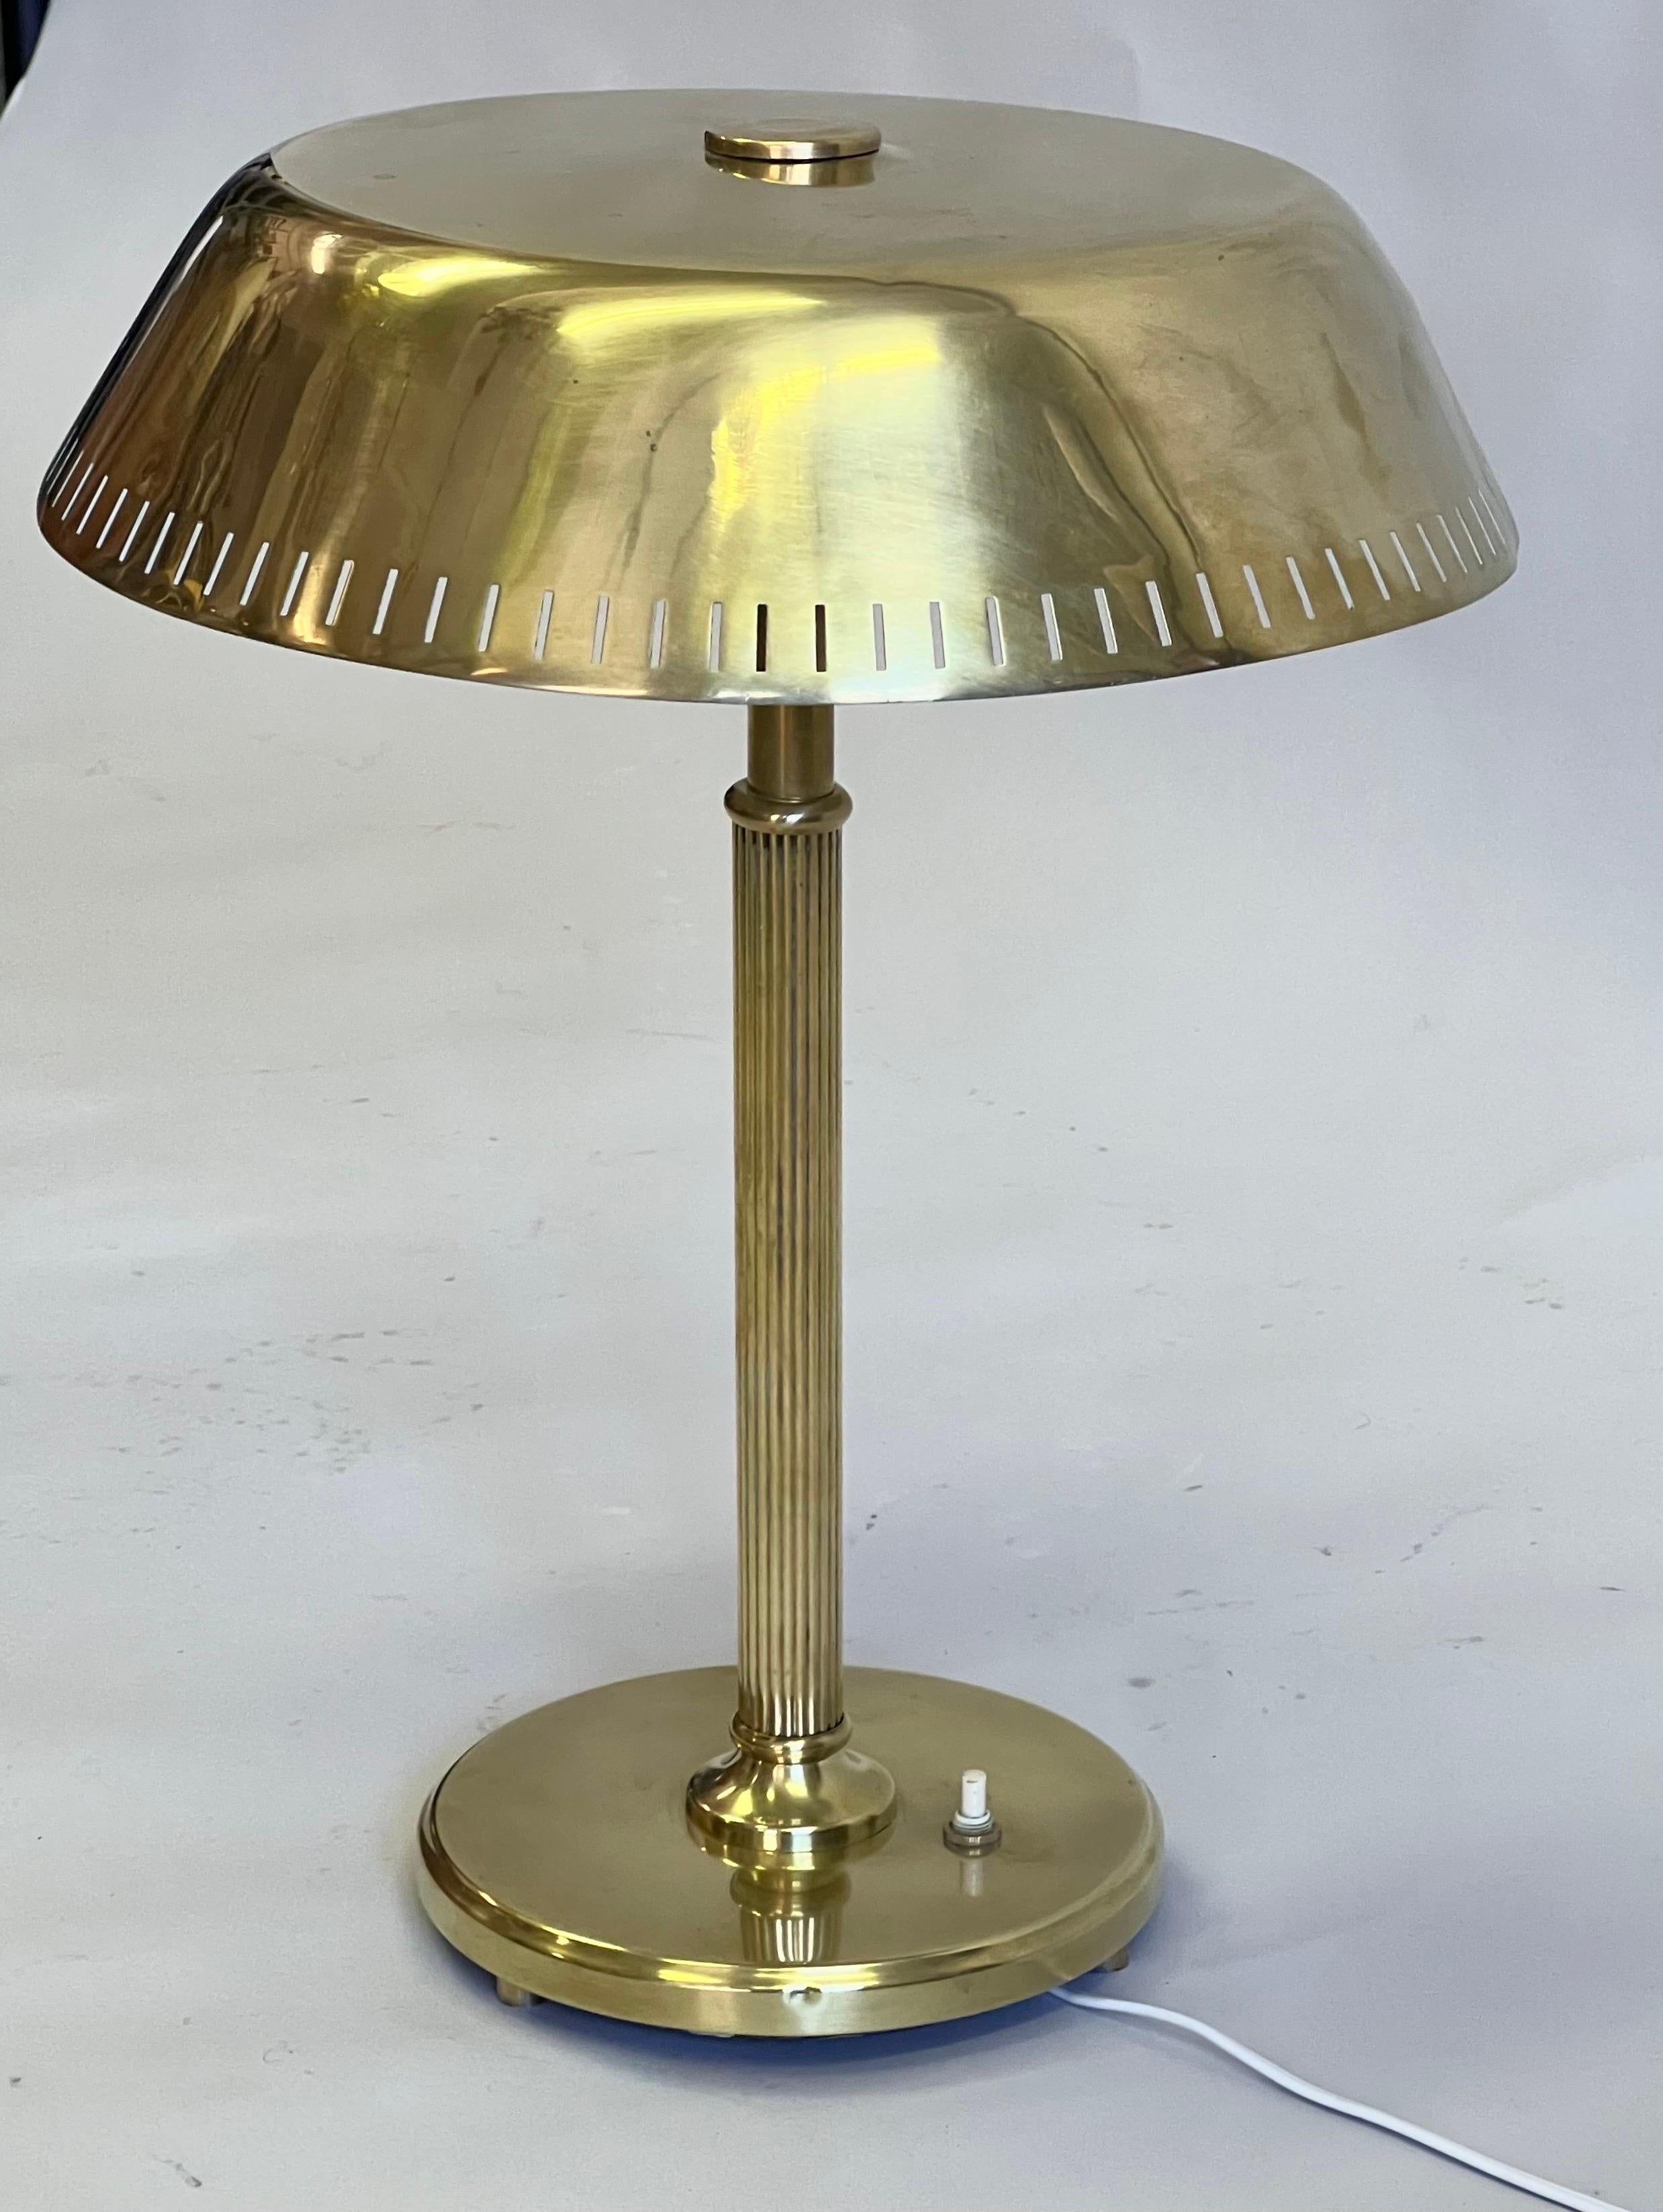 A Rare and Timeless Scandinavian Mid-Century Modern Neoclassical Desk or Table Lamp in solid brass and attributed to Paavo Tynell for Taito Oy, Finland circa 1935. An elegant design piece composed of a round. circular base delicately elevated on 3